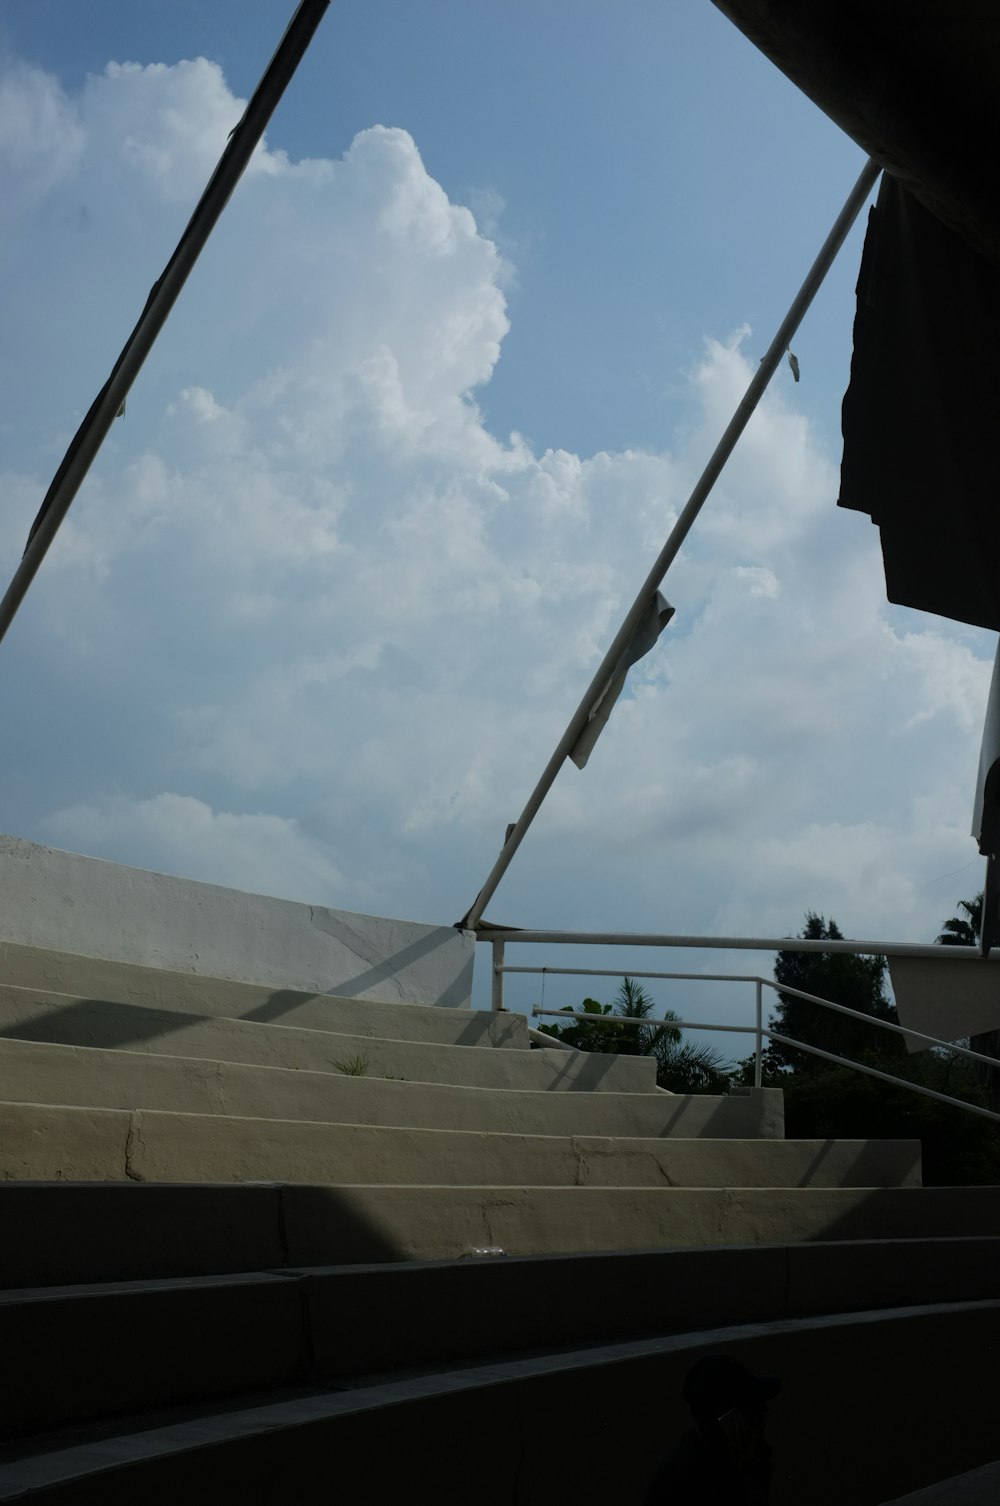 a view of some stairs and a sky with clouds